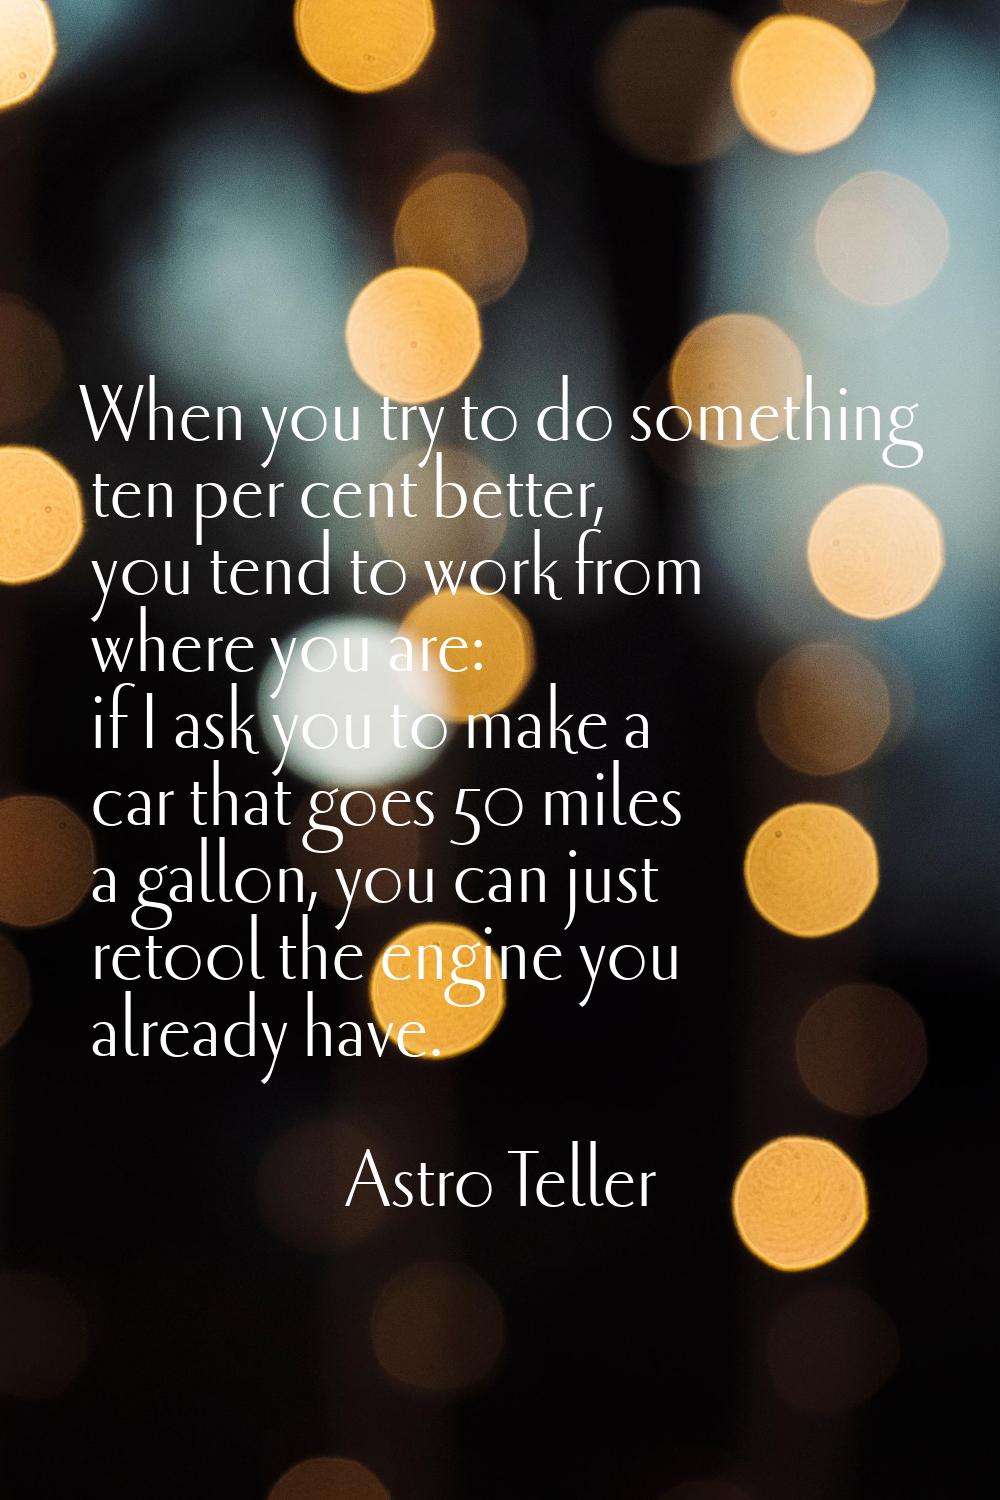 When you try to do something ten per cent better, you tend to work from where you are: if I ask you